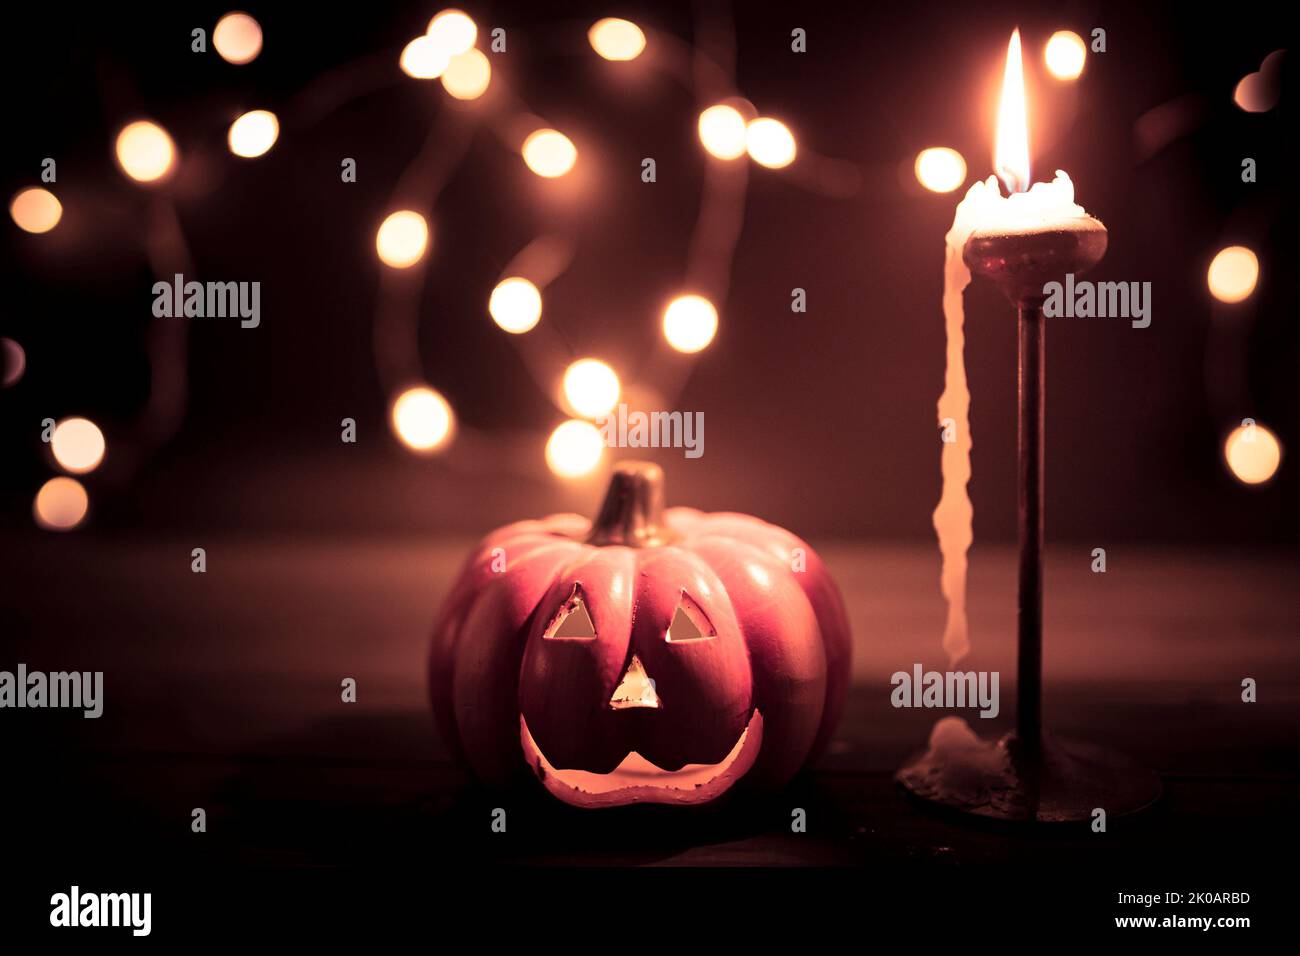 Halloween pumpkin wallpaper with candle and string lights bokeh in the background. Toned vintage colors. Stock Photo